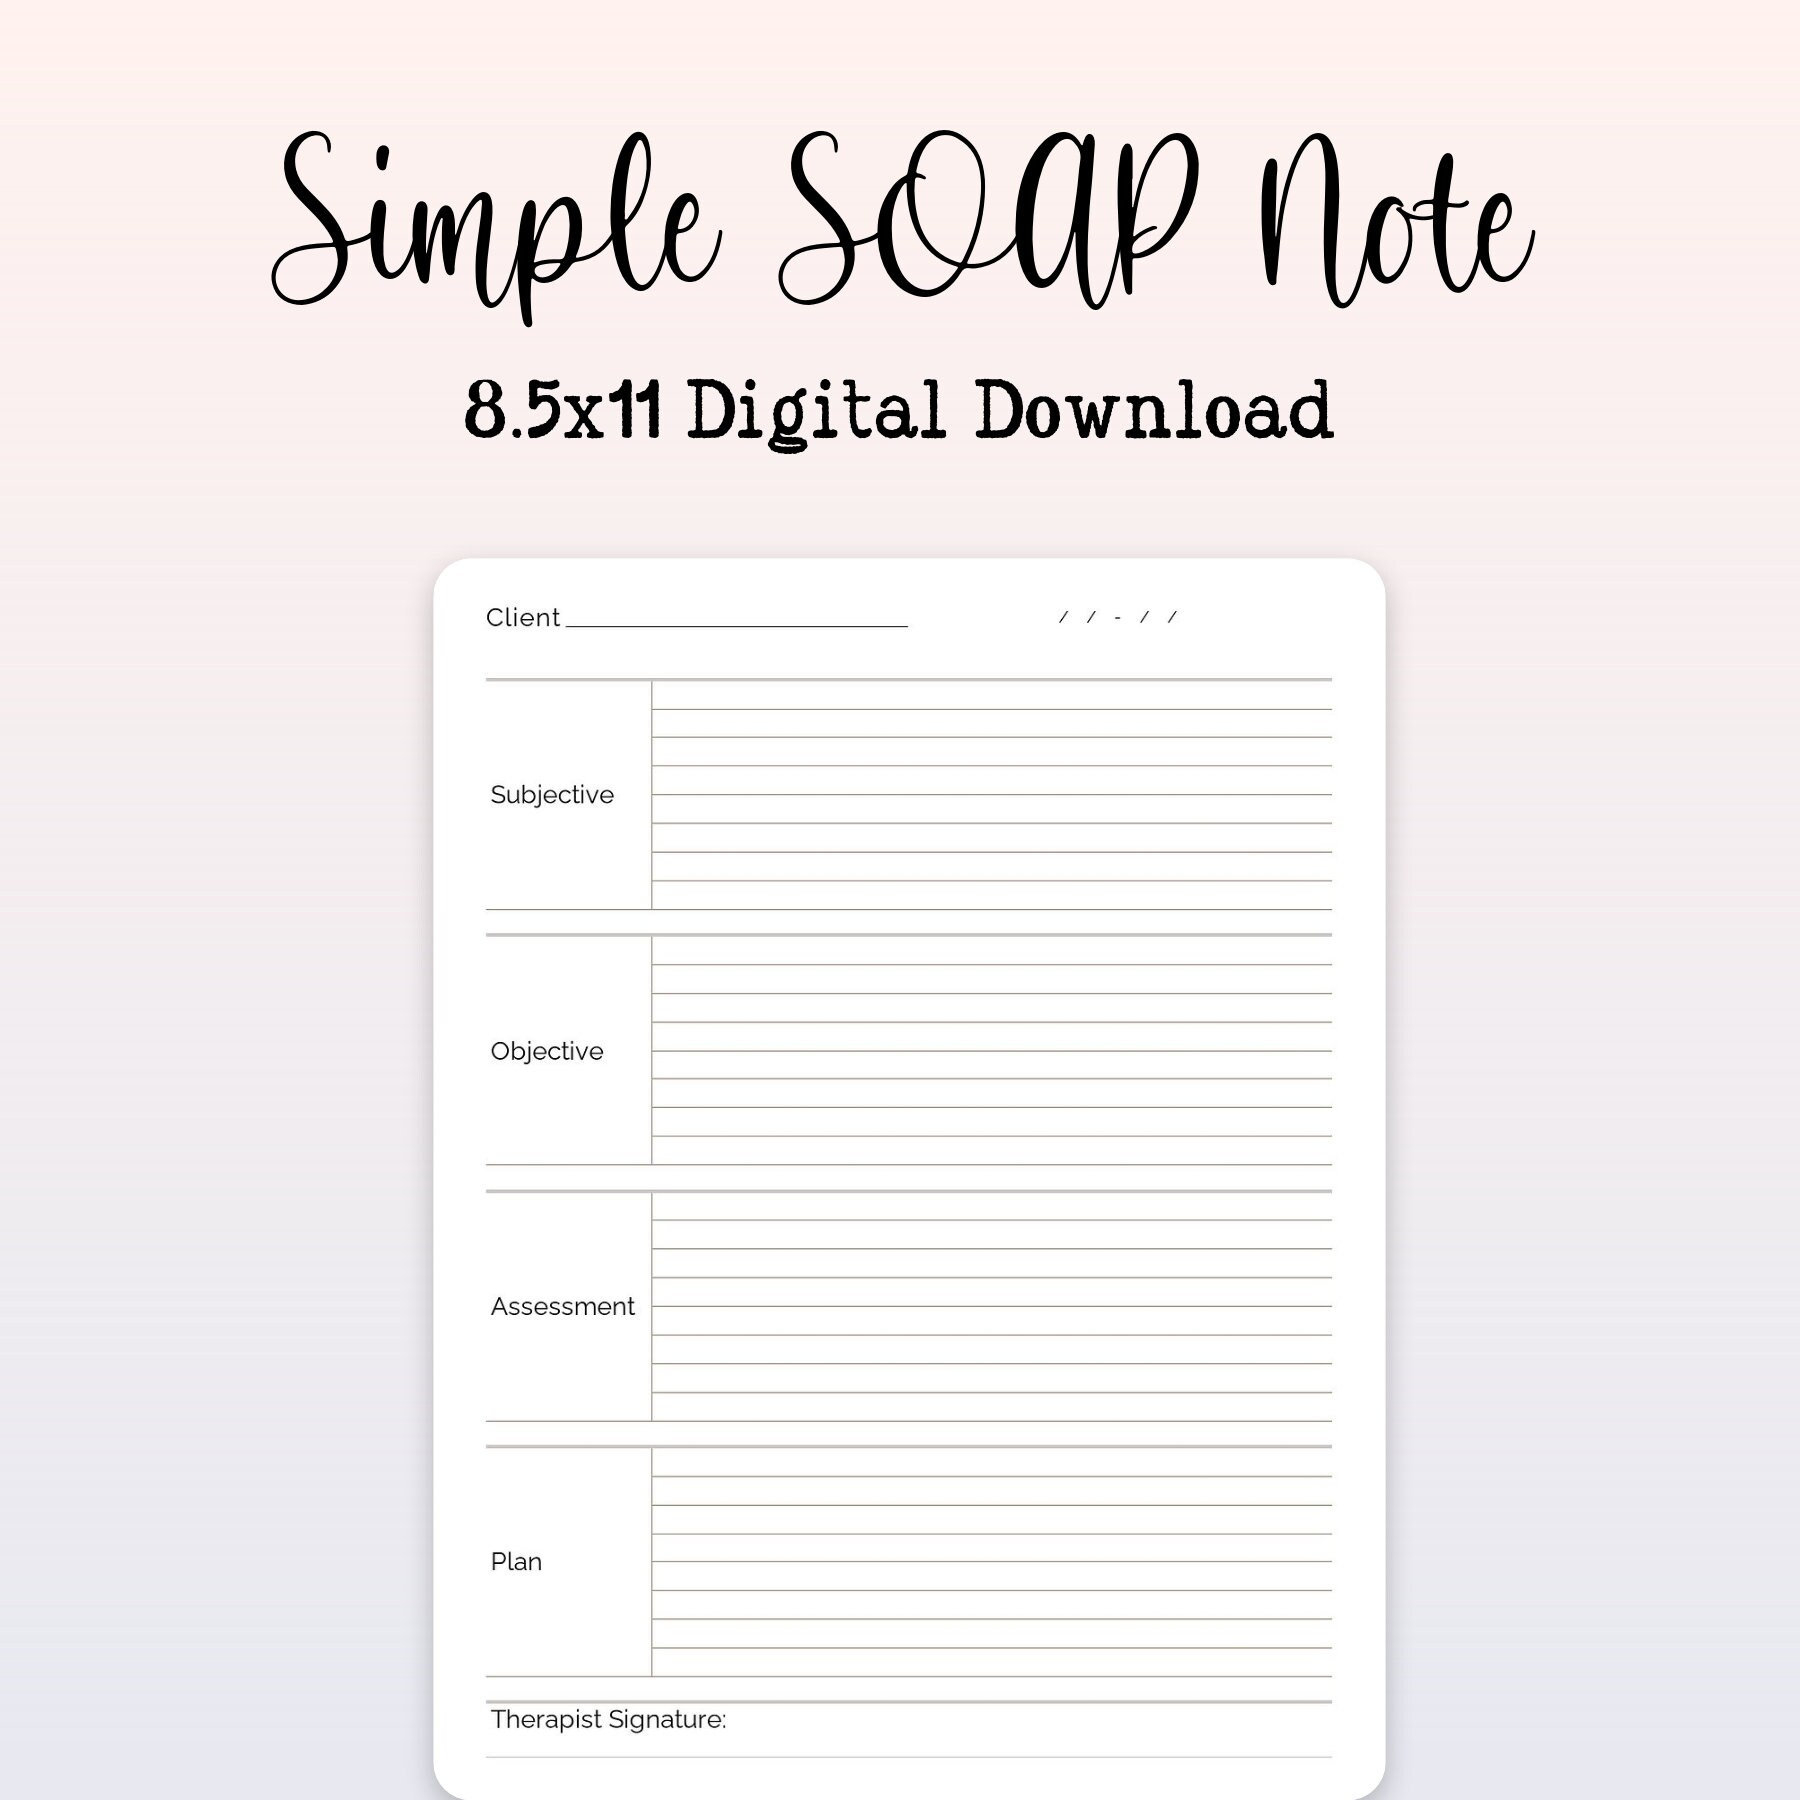 SOAP Note Template Simple Therapy Note Counselor Note – Etsy With Regard To Blank Soap Note Template